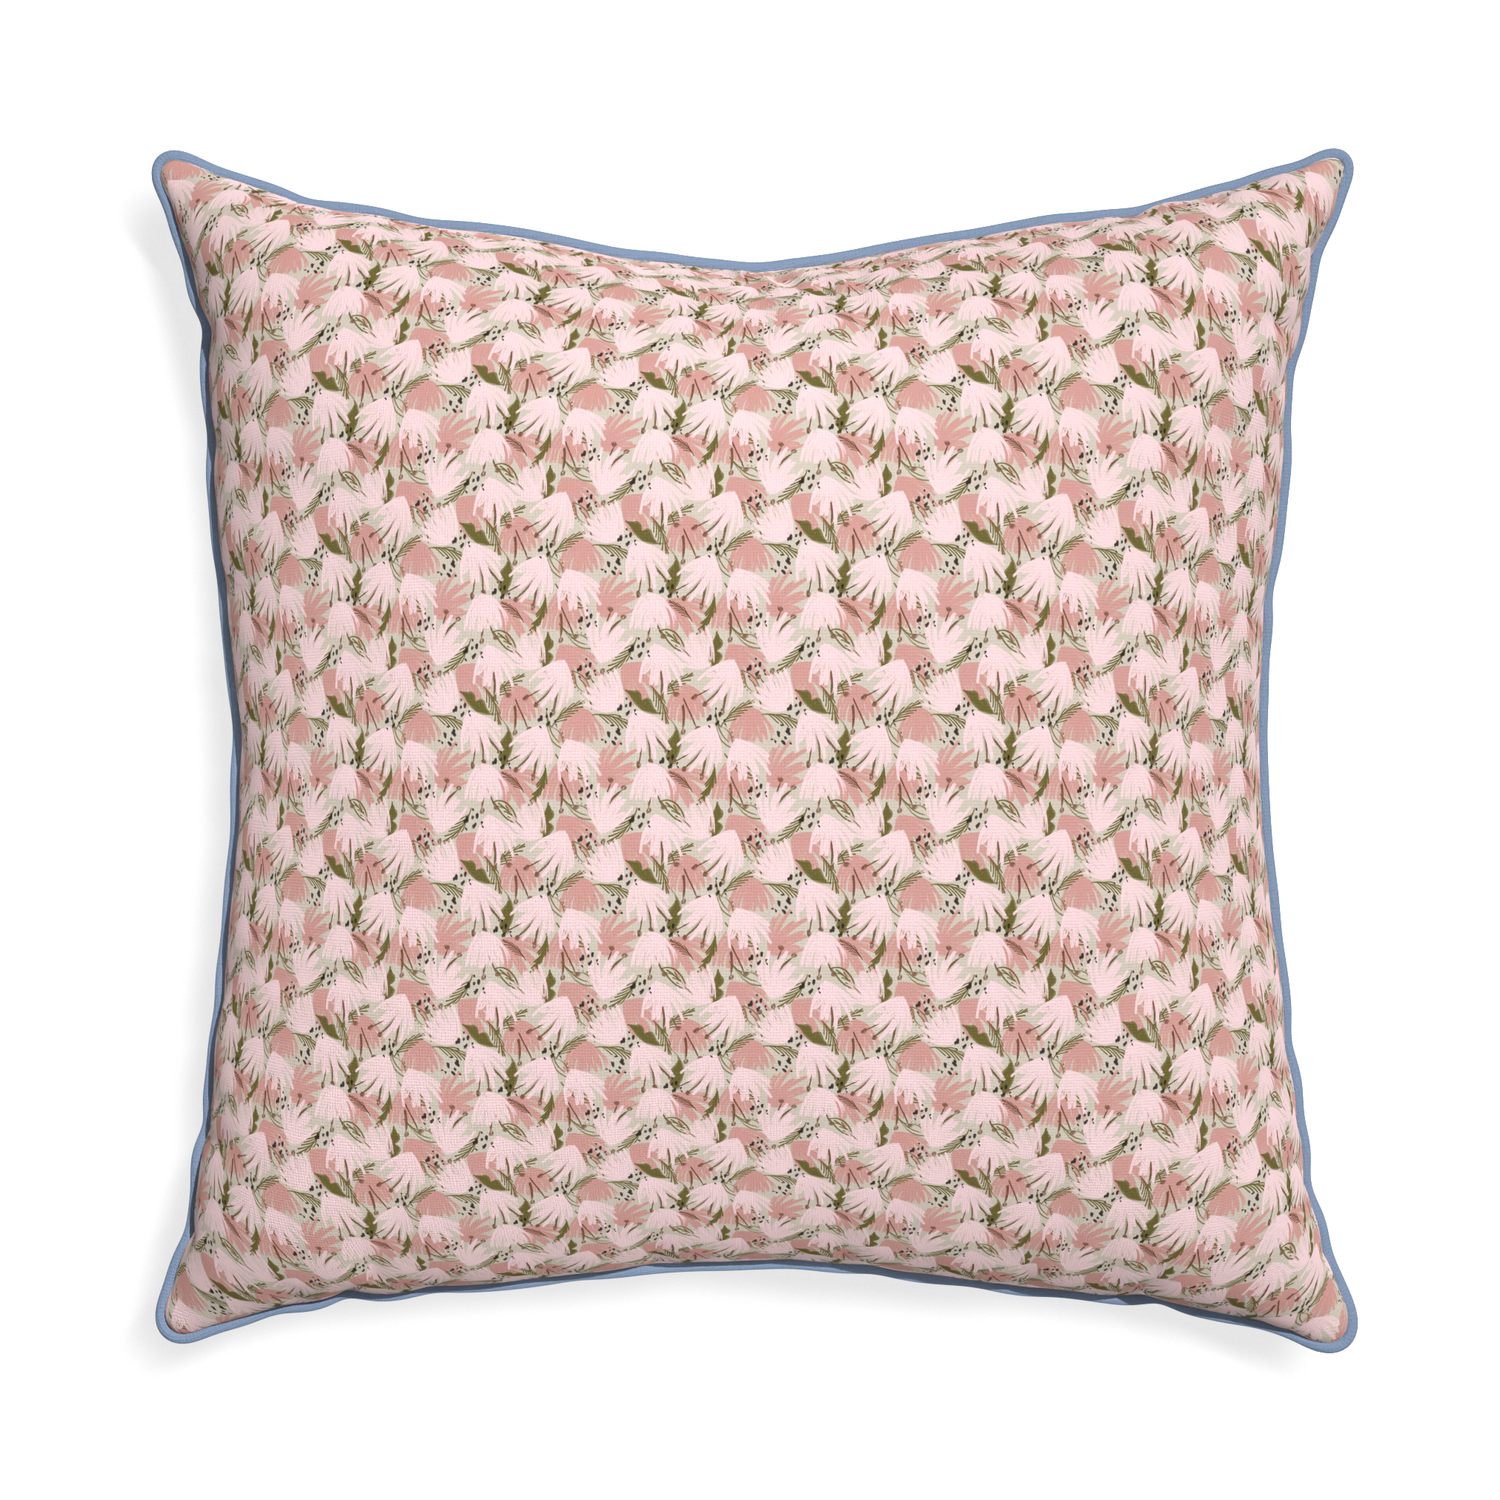 Euro-sham eden pink custom pillow with sky piping on white background